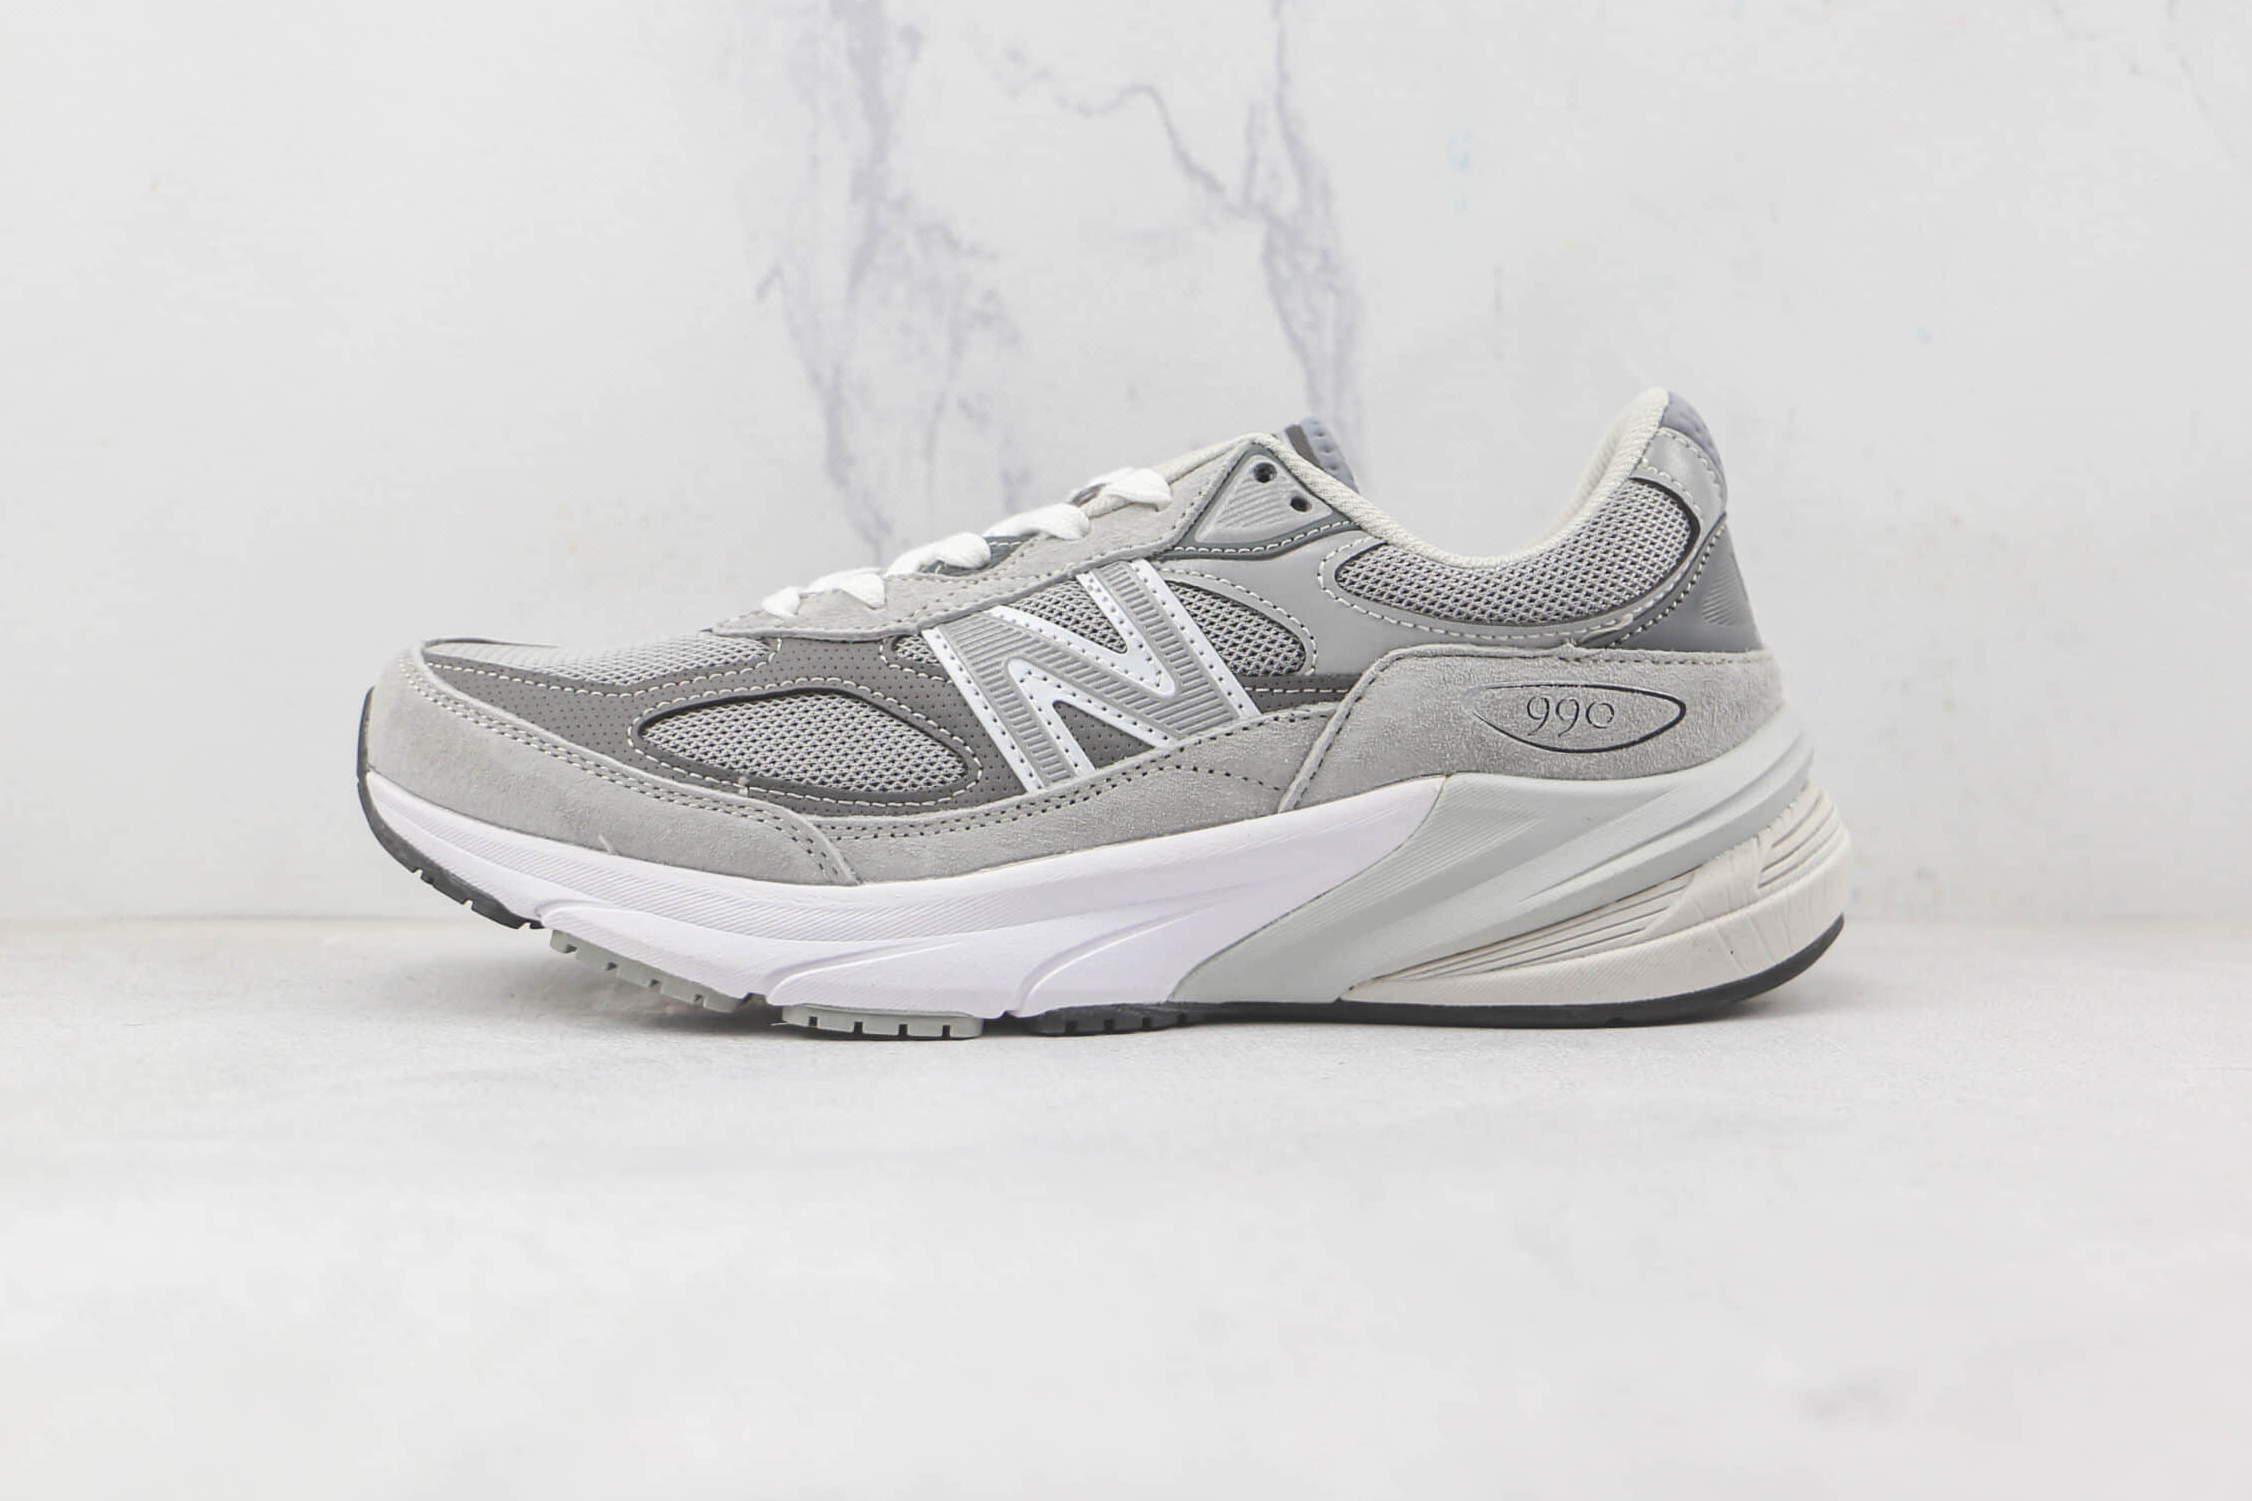 New Balance 990v6 Made in USA 'Grey' - Stylish and Comfortable Sneakers